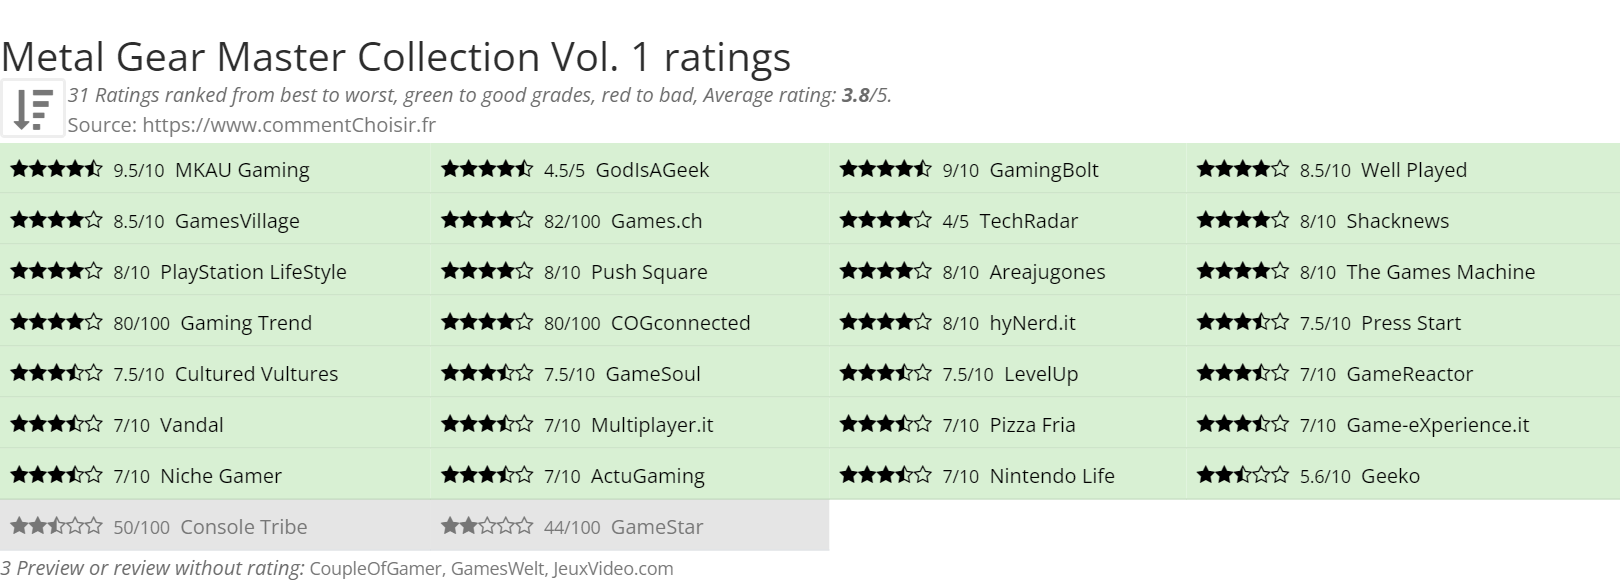 Ratings Metal Gear Master Collection Vol. 1